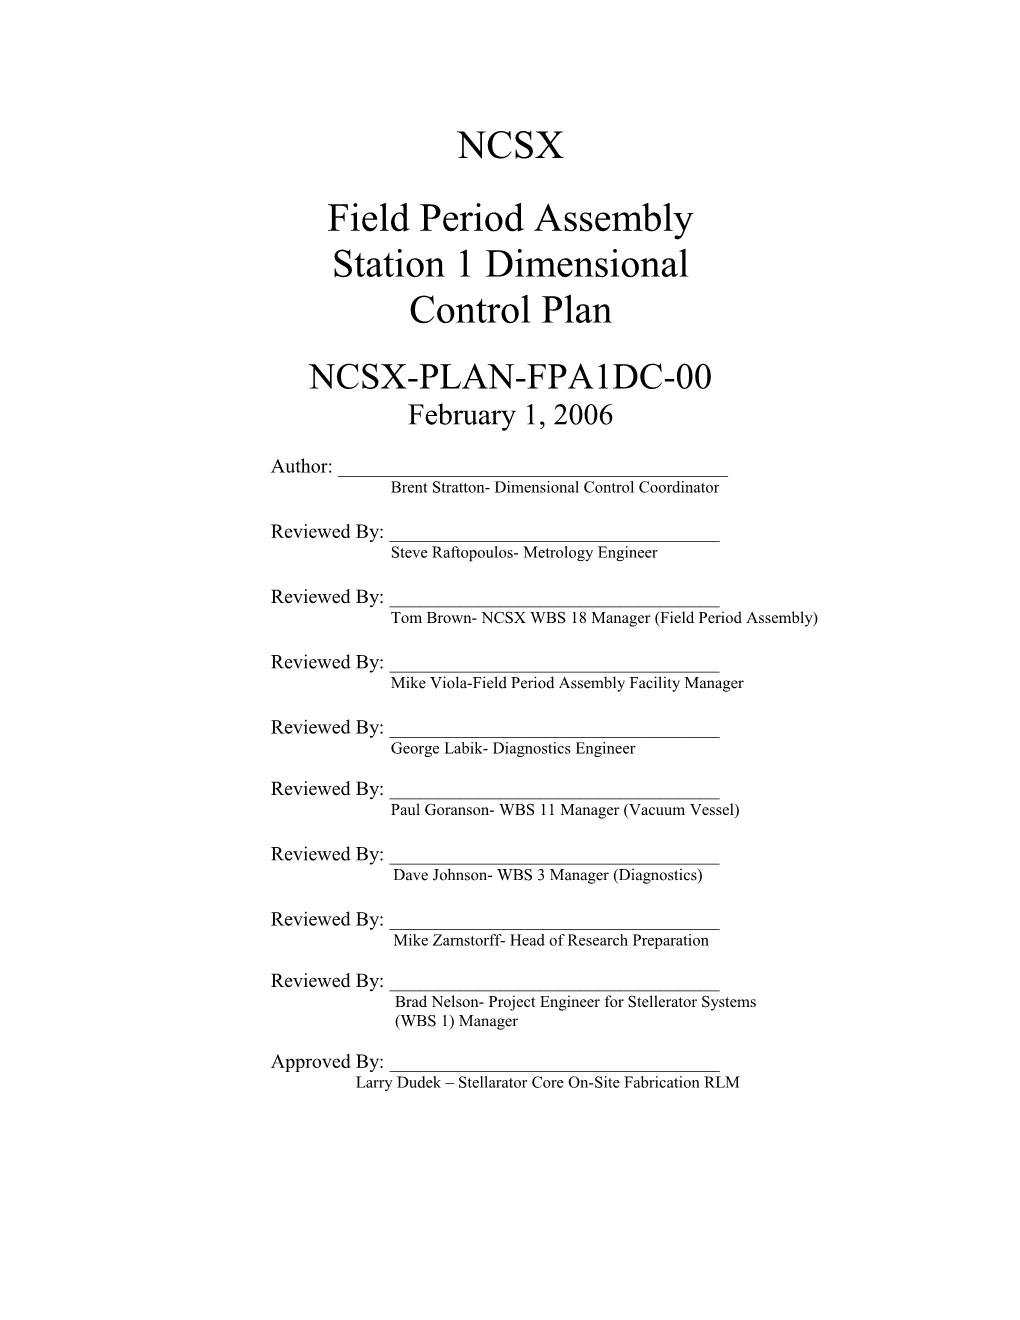 Field Period Assembly s1